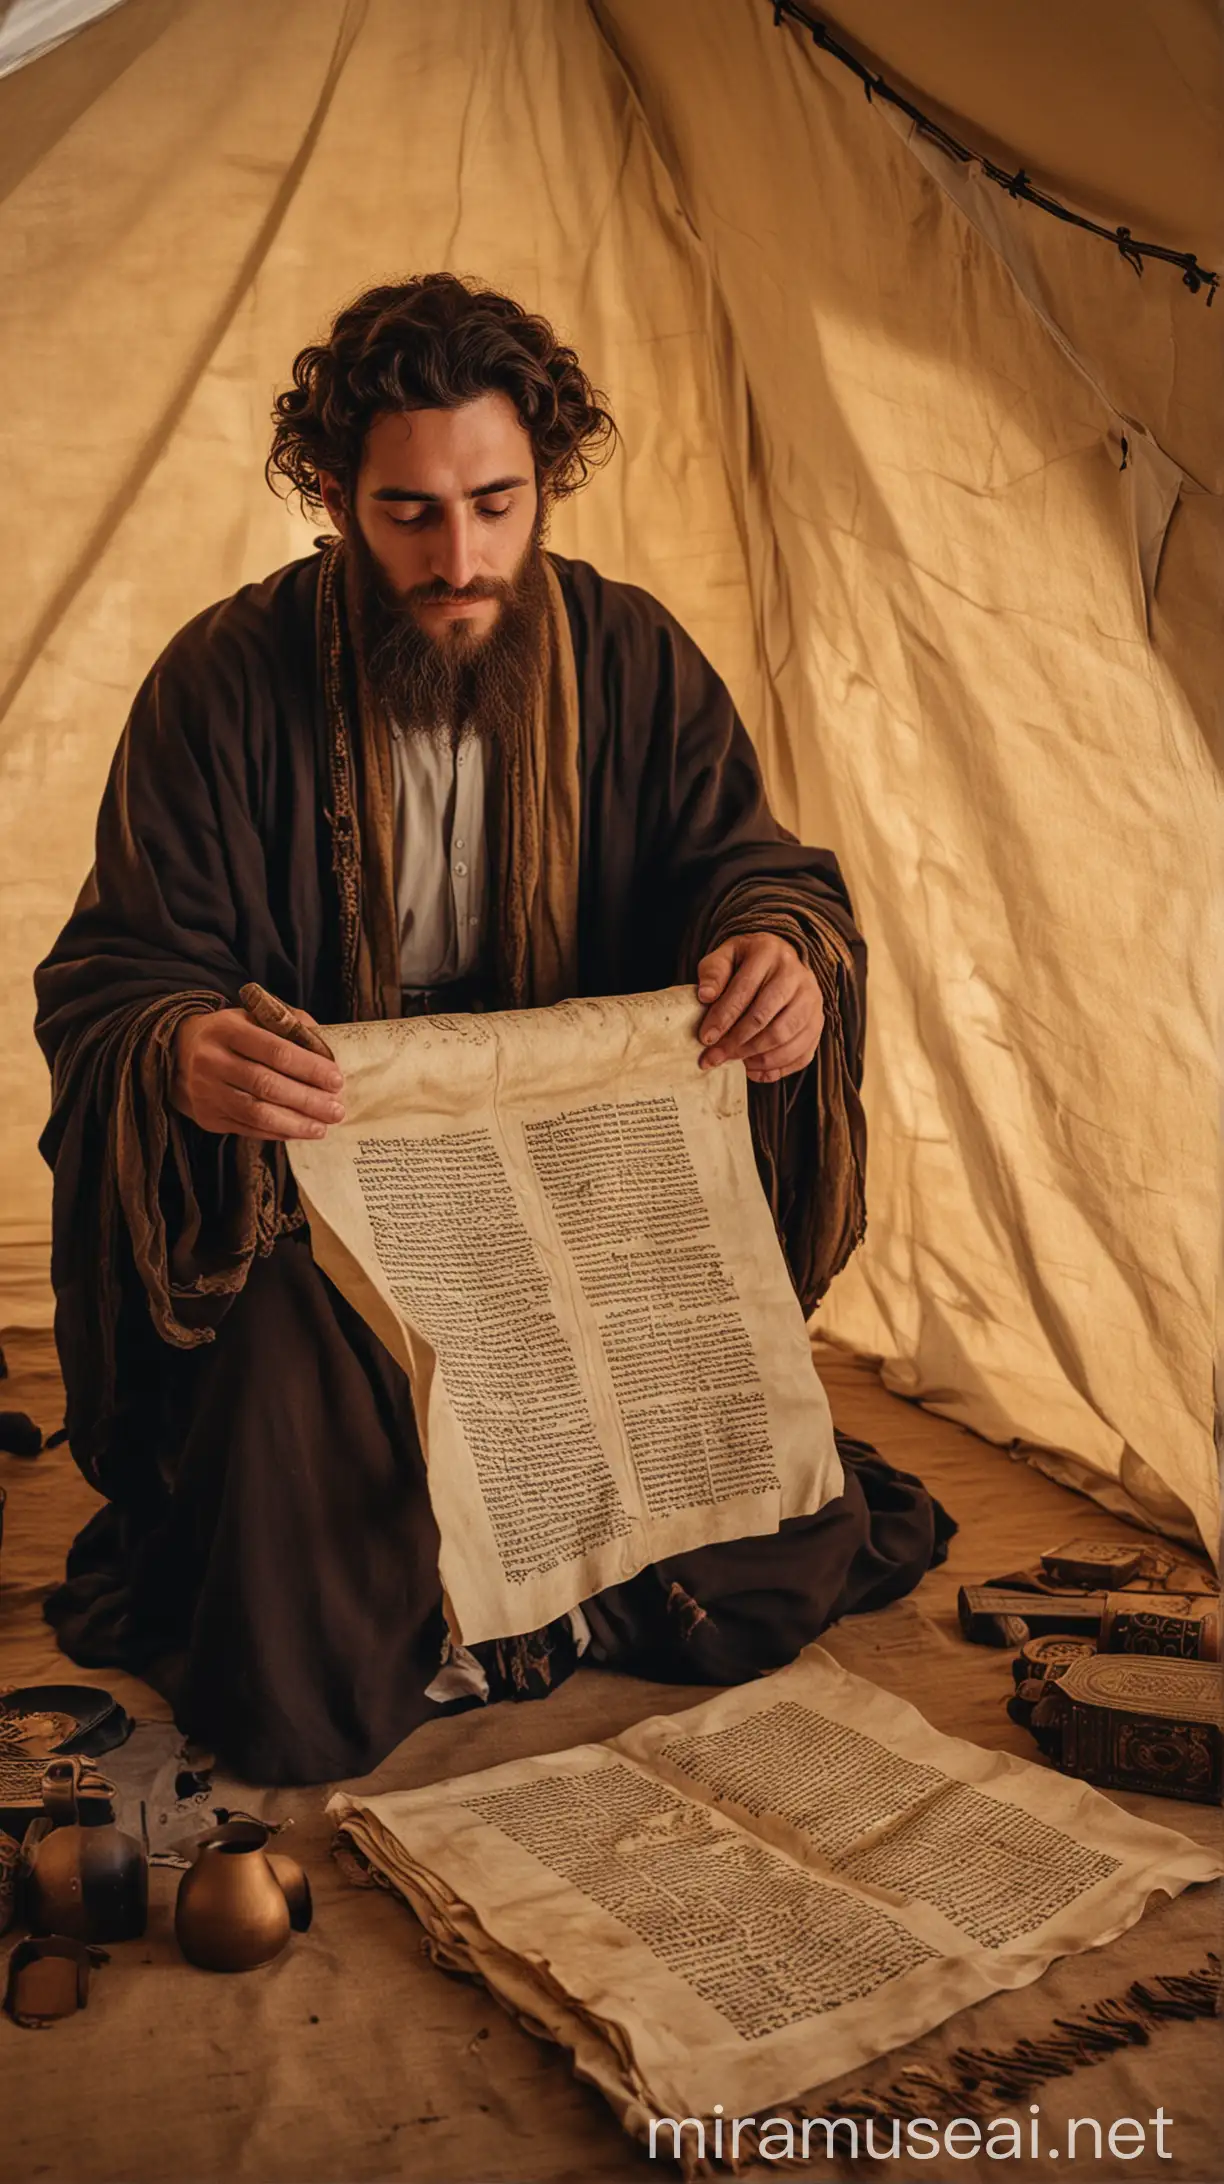 Jewish Man Reading Ancient Scroll in Ancient Tent